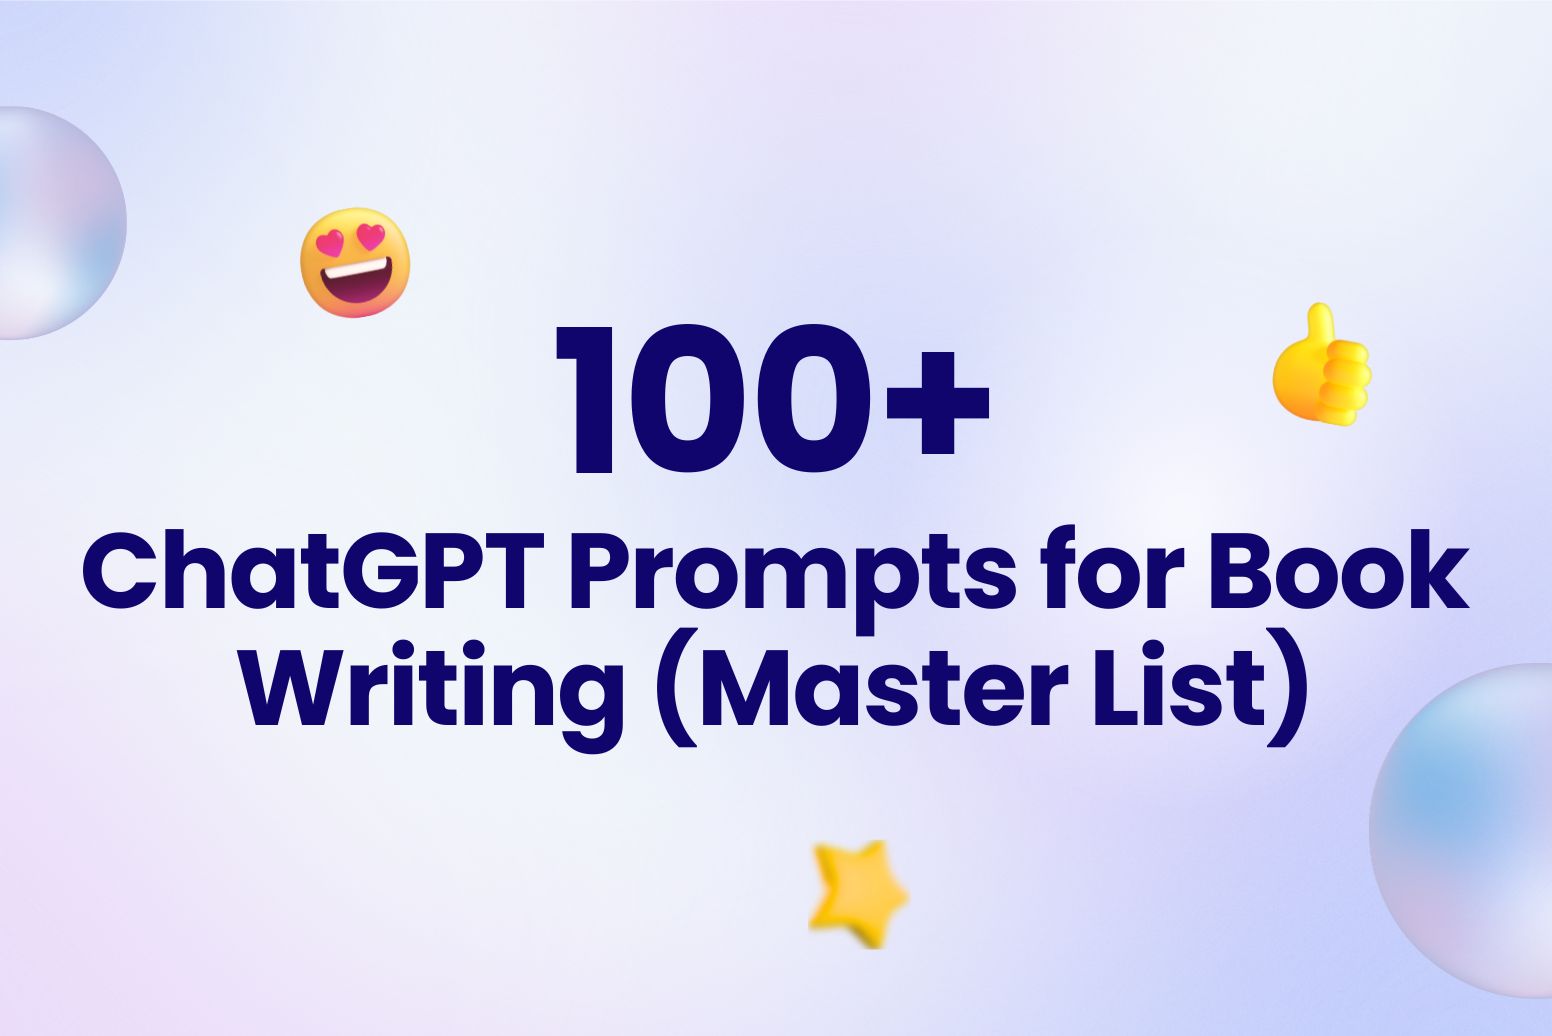 100+ ChatGPT Prompts for Book Writing (Master List)